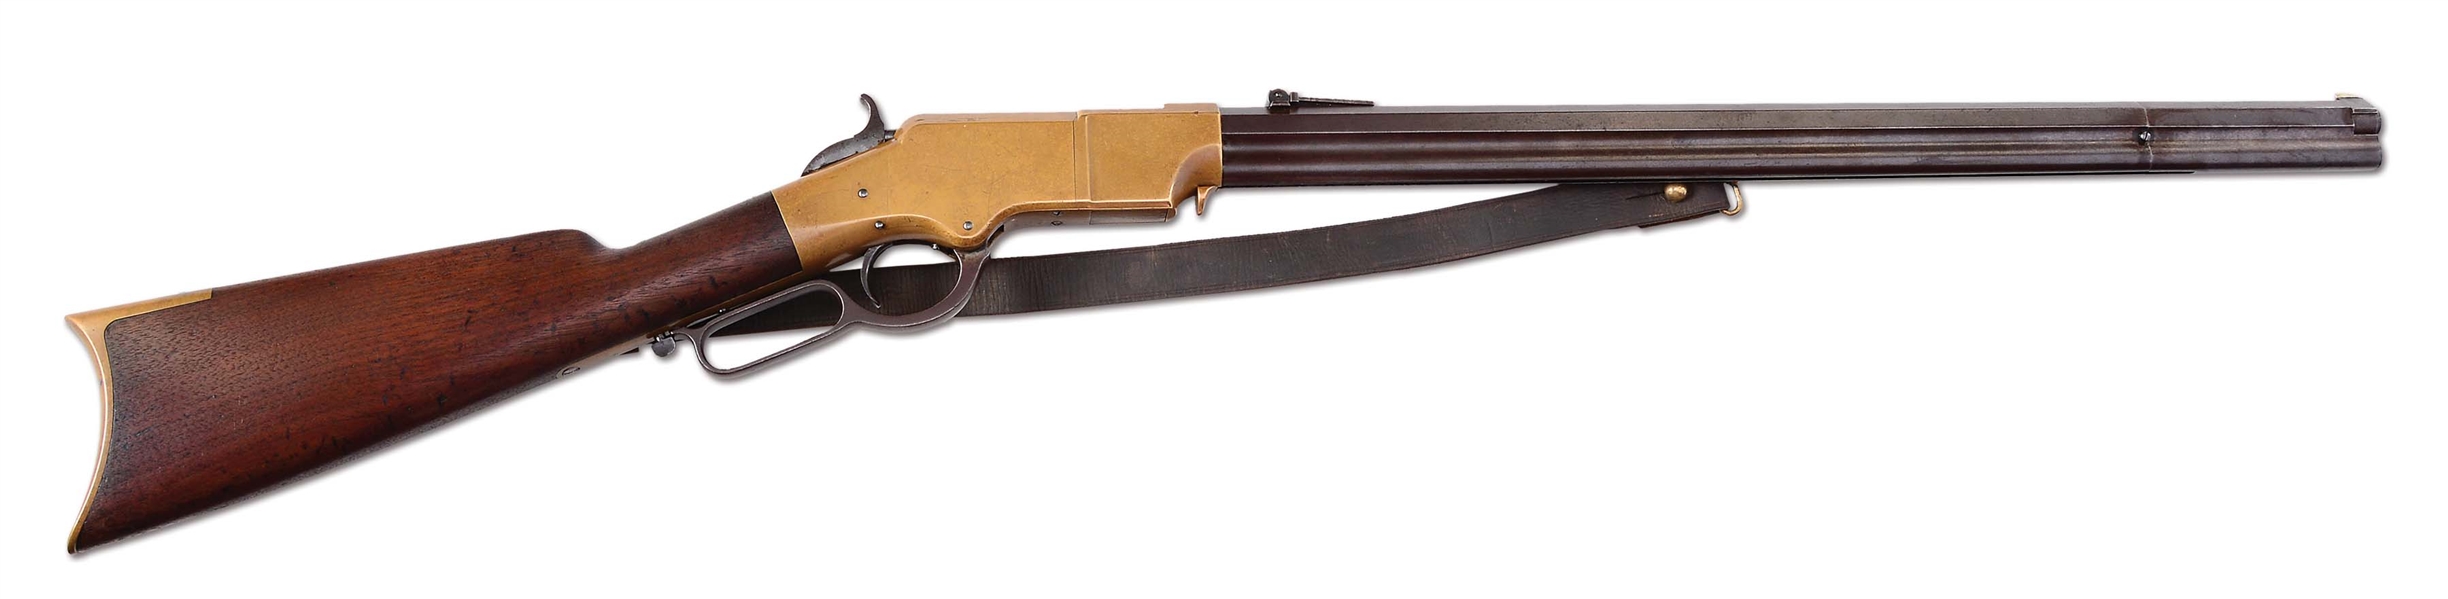 (A) NEW HAVEN ARMS COMMERCIAL HENRY RIFLE (1864).